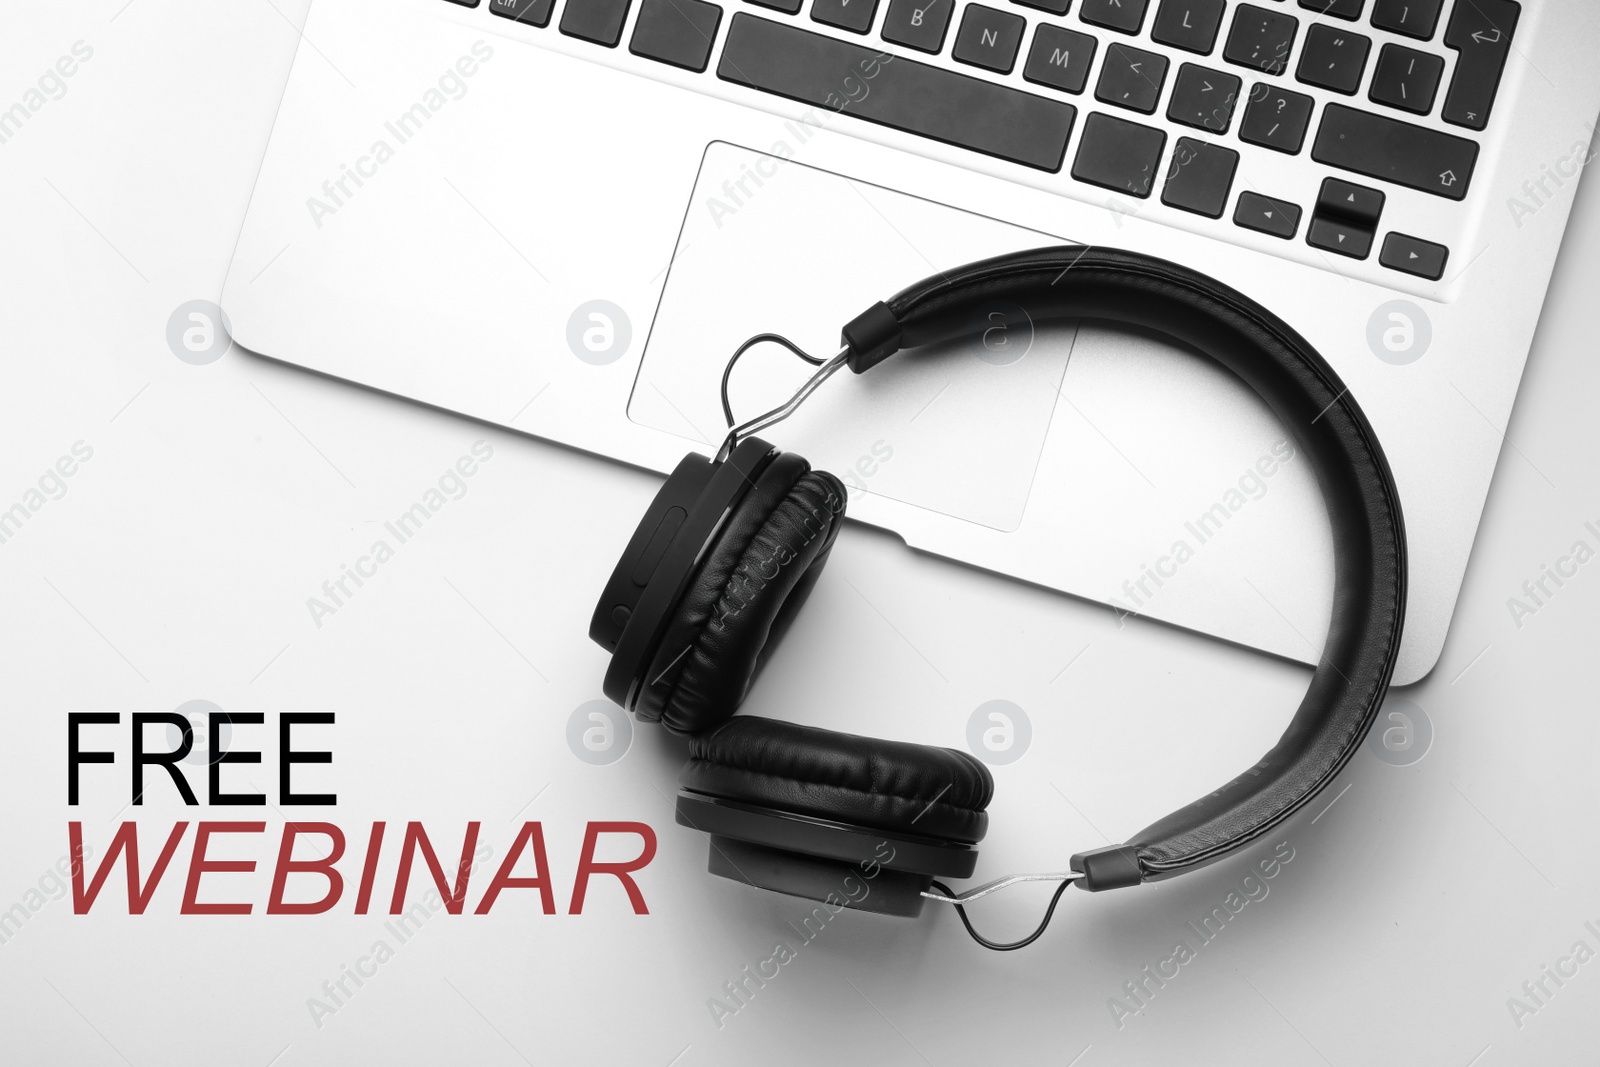 Image of FREE WEBINAR. Modern headphones and laptop on white background, flat lay